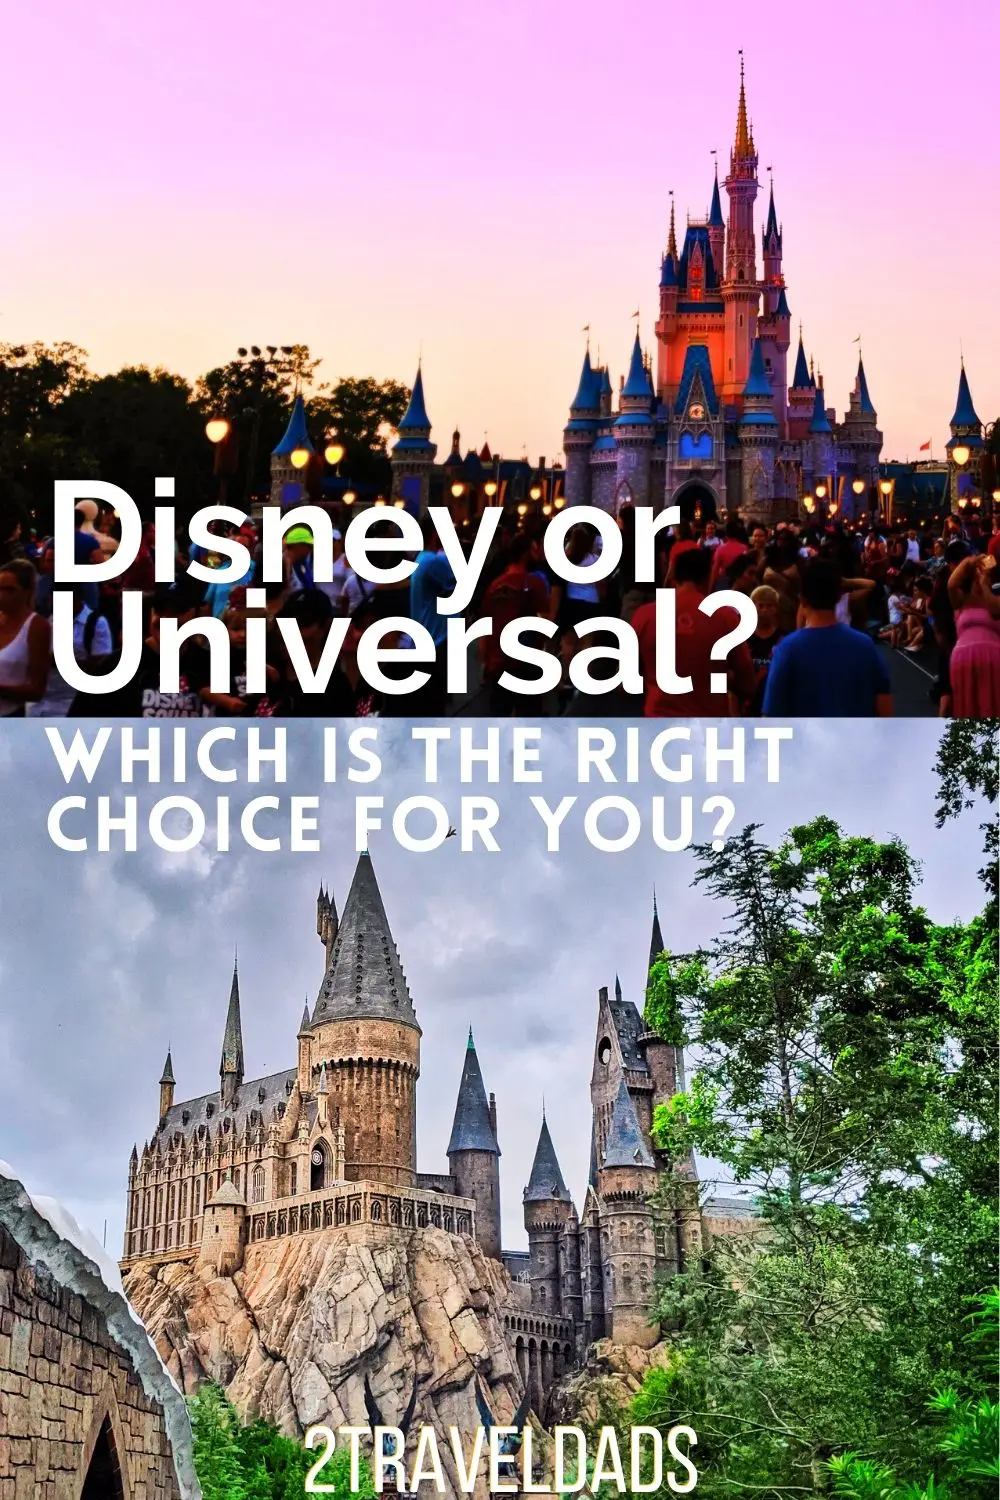 Not sure if you should choose Disney World or Universal Orlando? Thrill rides, family friendly options, dining, and overall costs broken down to help decide between Disney and Universal.